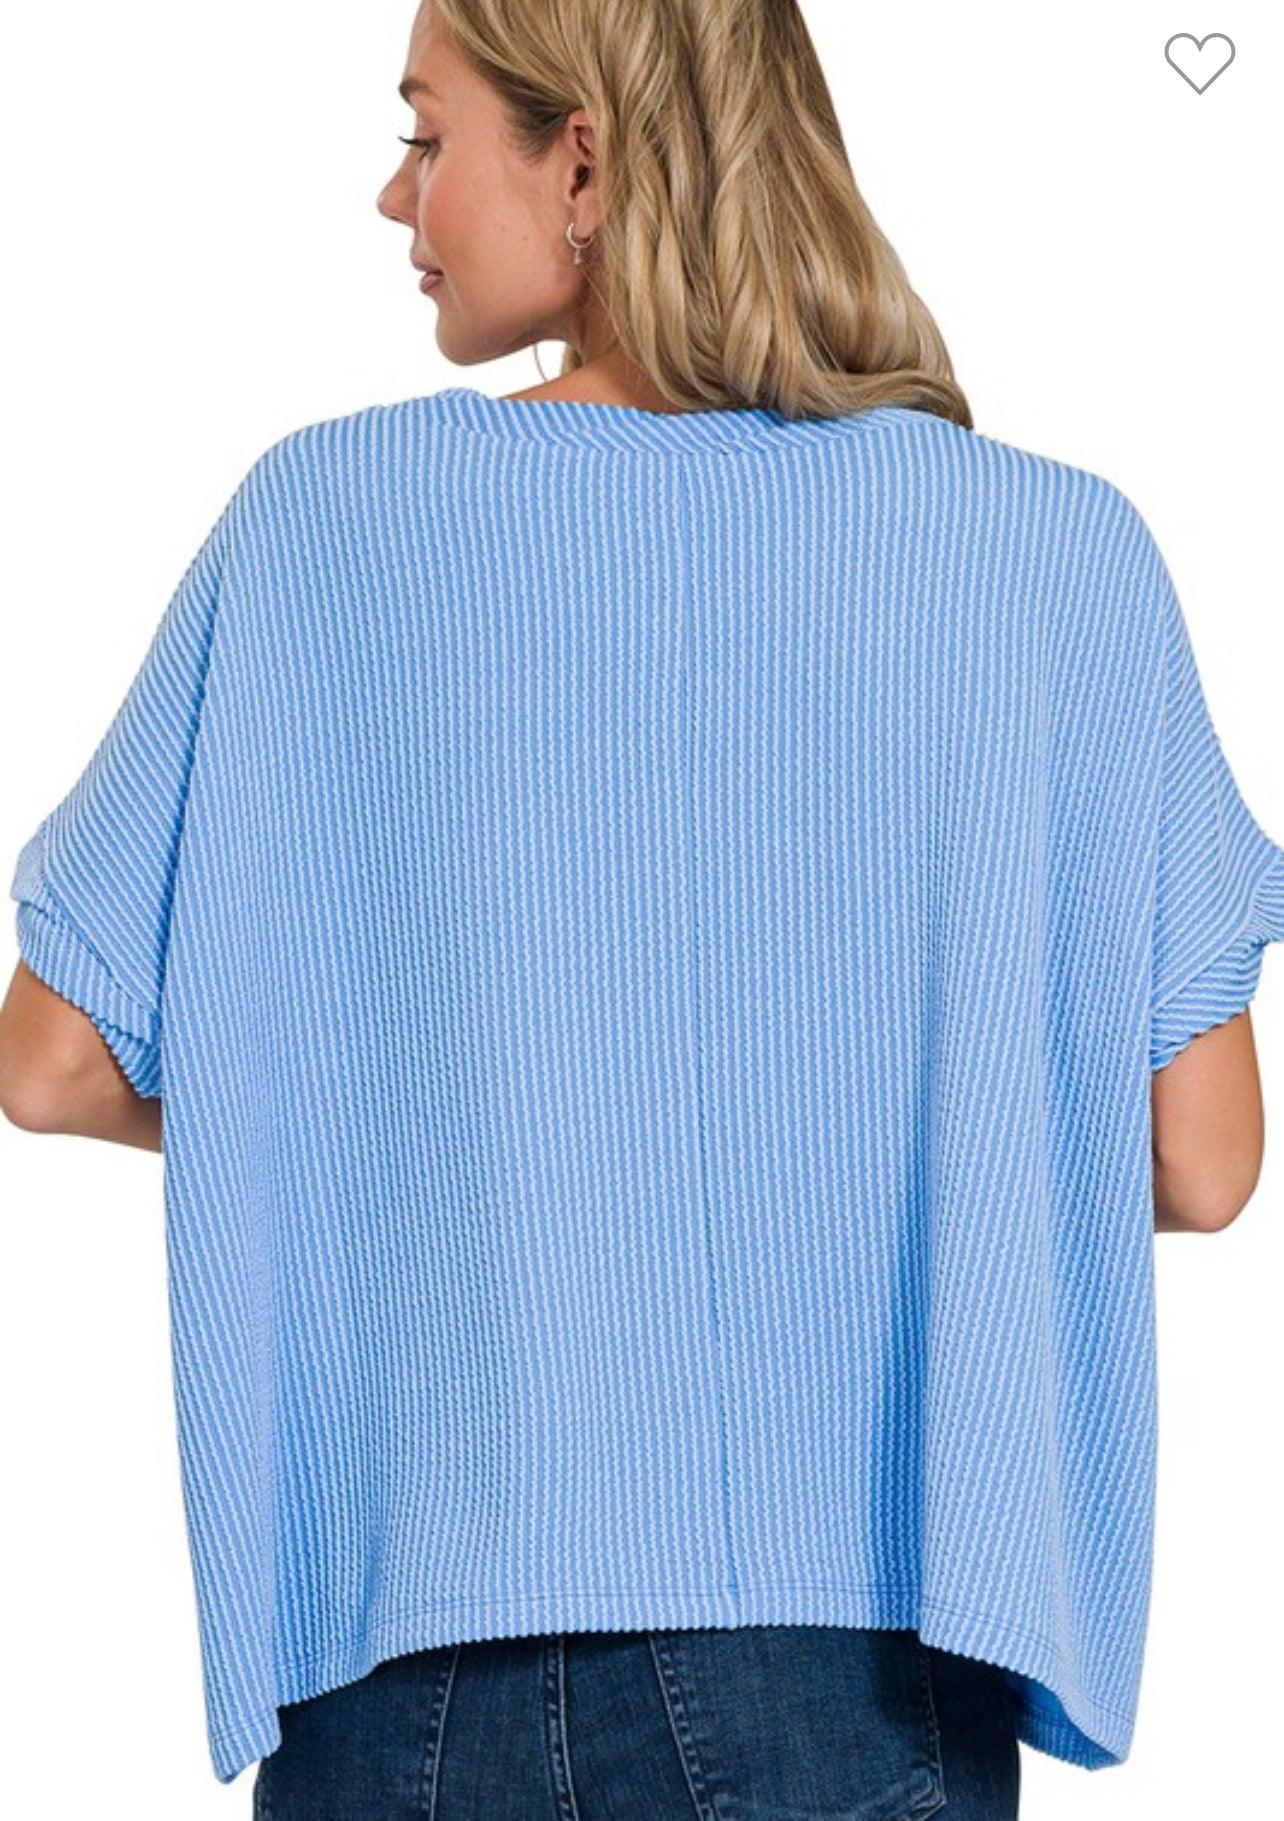 Textured Twisted Sleeve Top - BeLoved Boutique 